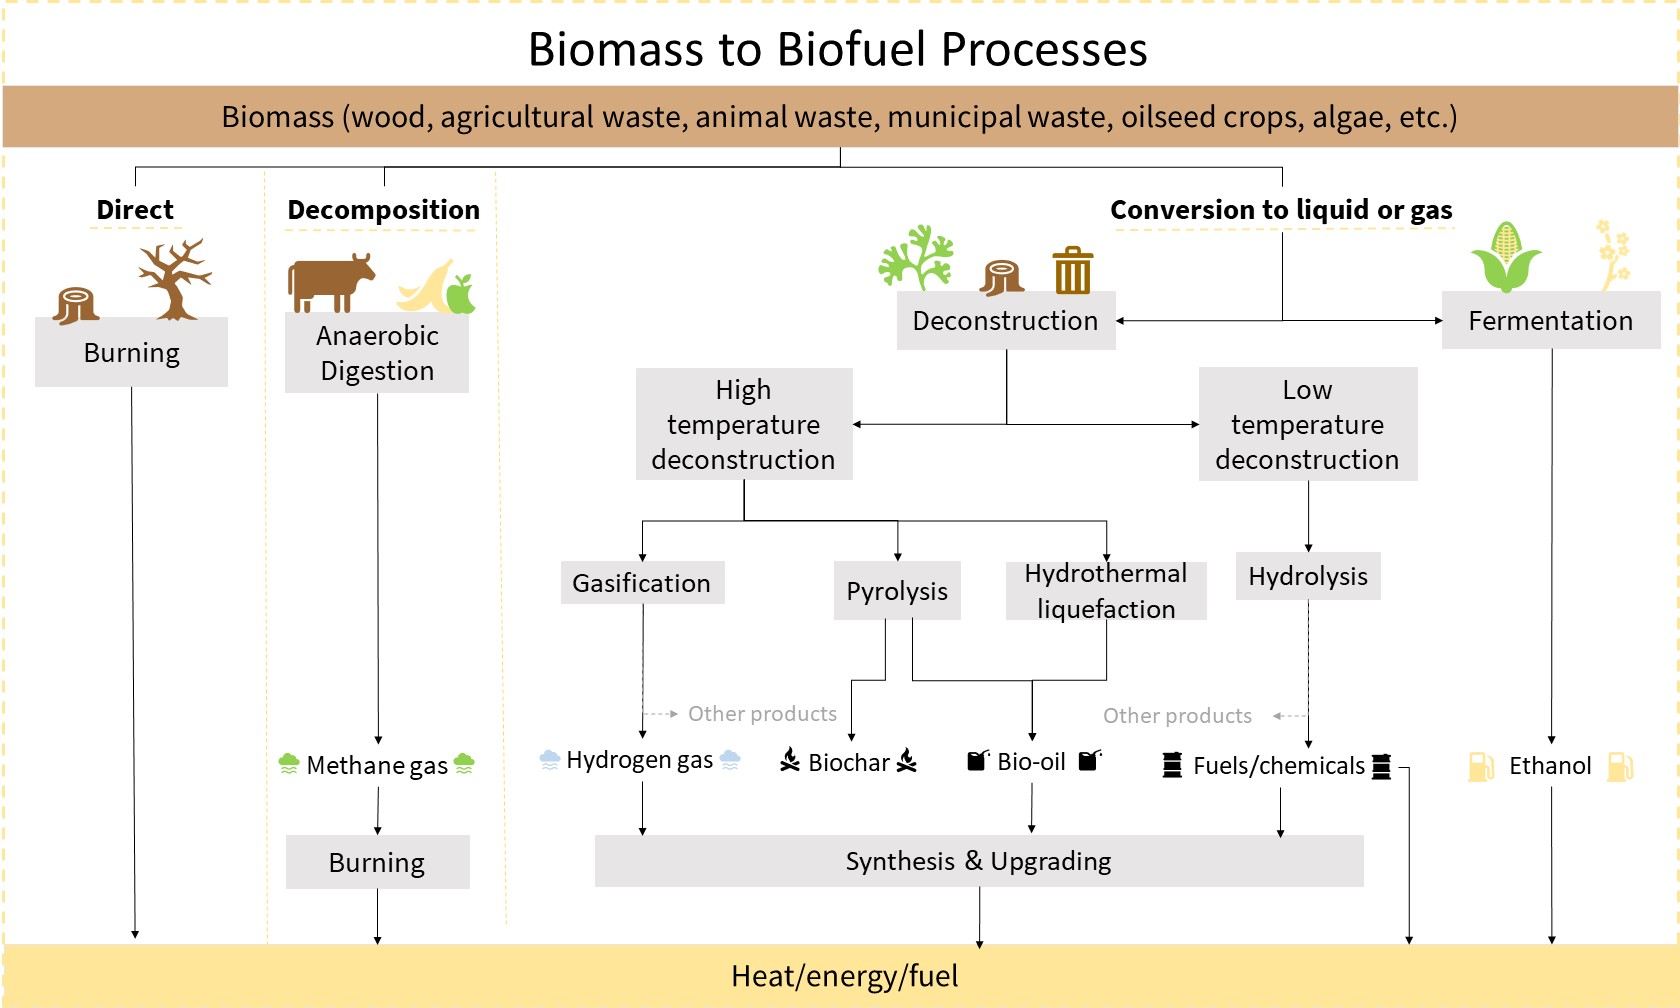 Diagram of the ways biofuels can be produced.